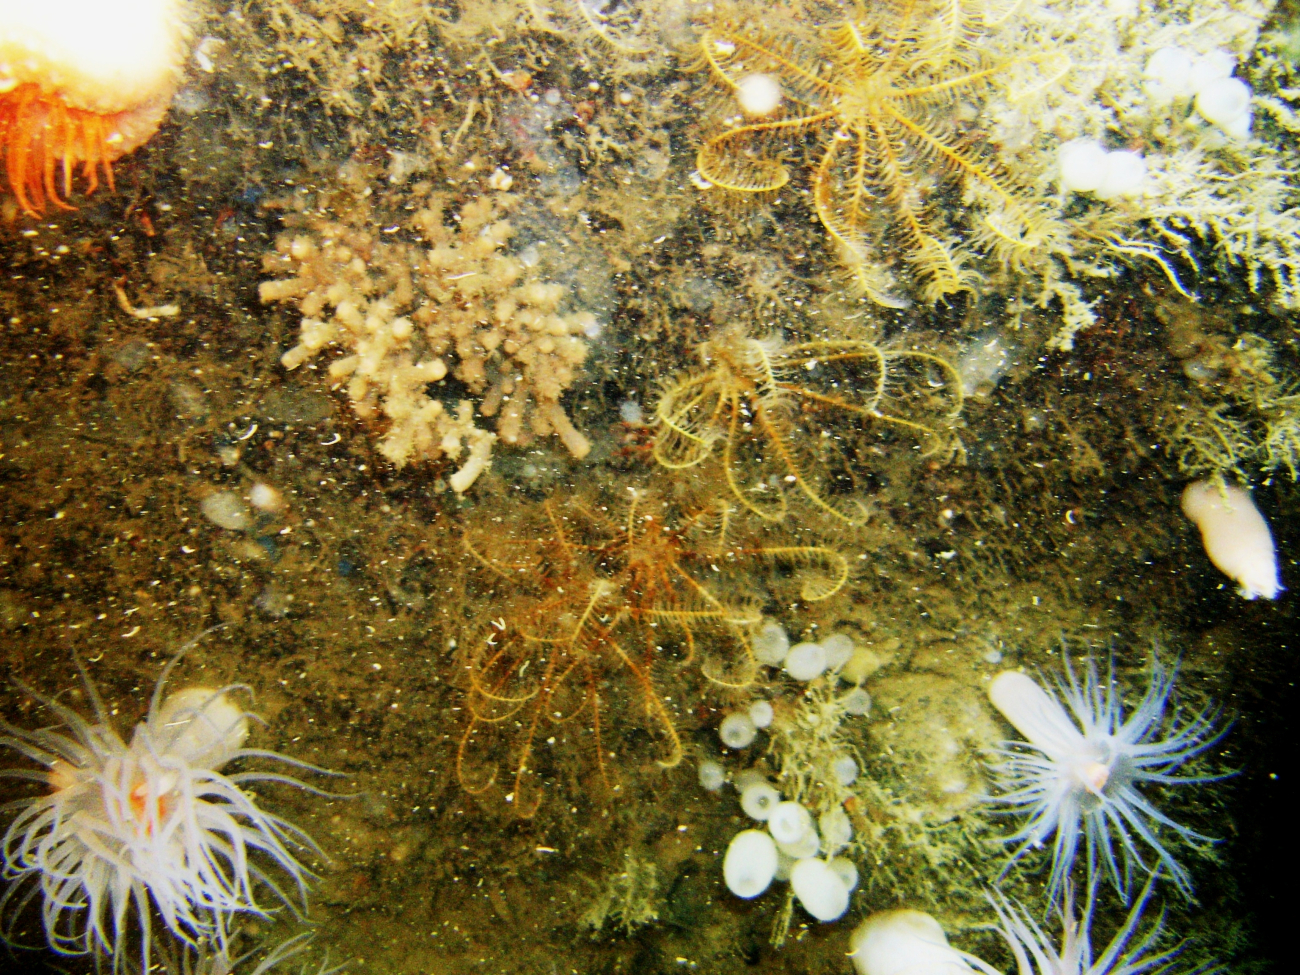 Yellow-orange feather star crinoids, large white anemones, zooanthids, smallstalked sponges, and a venus flytrap anemone in the upper left